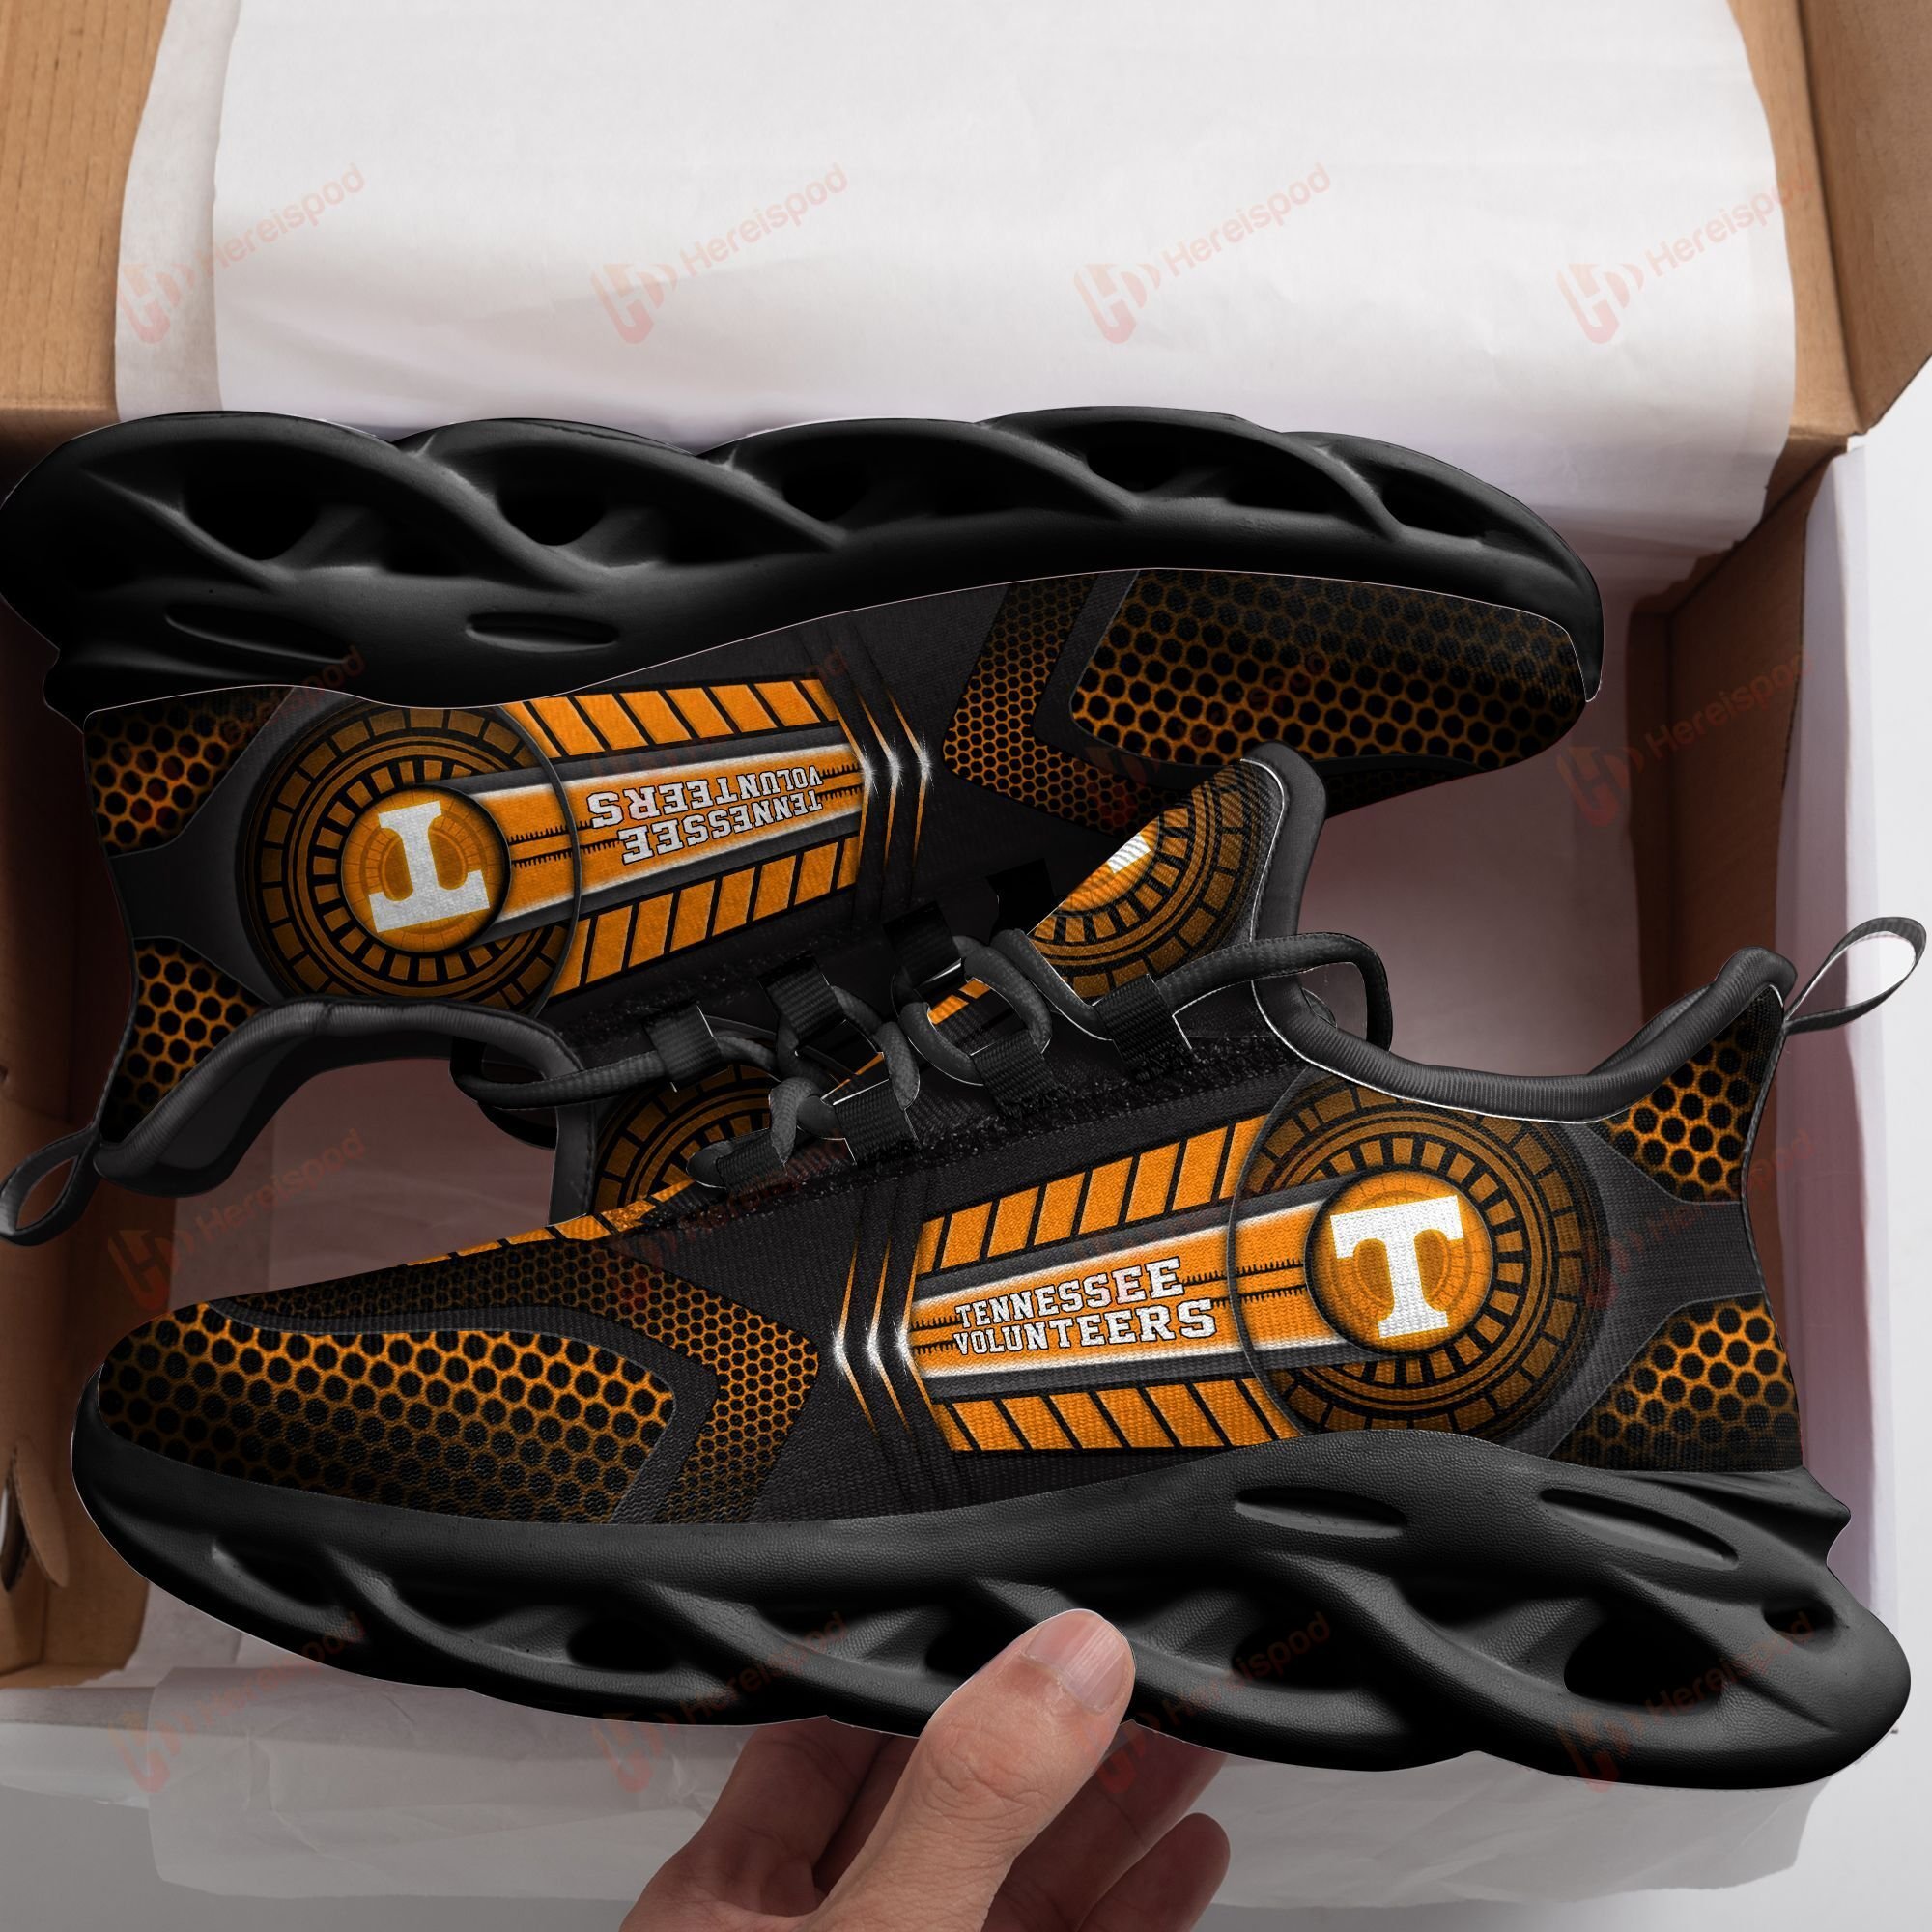 Tennessee volunteers clunky max soul shoes